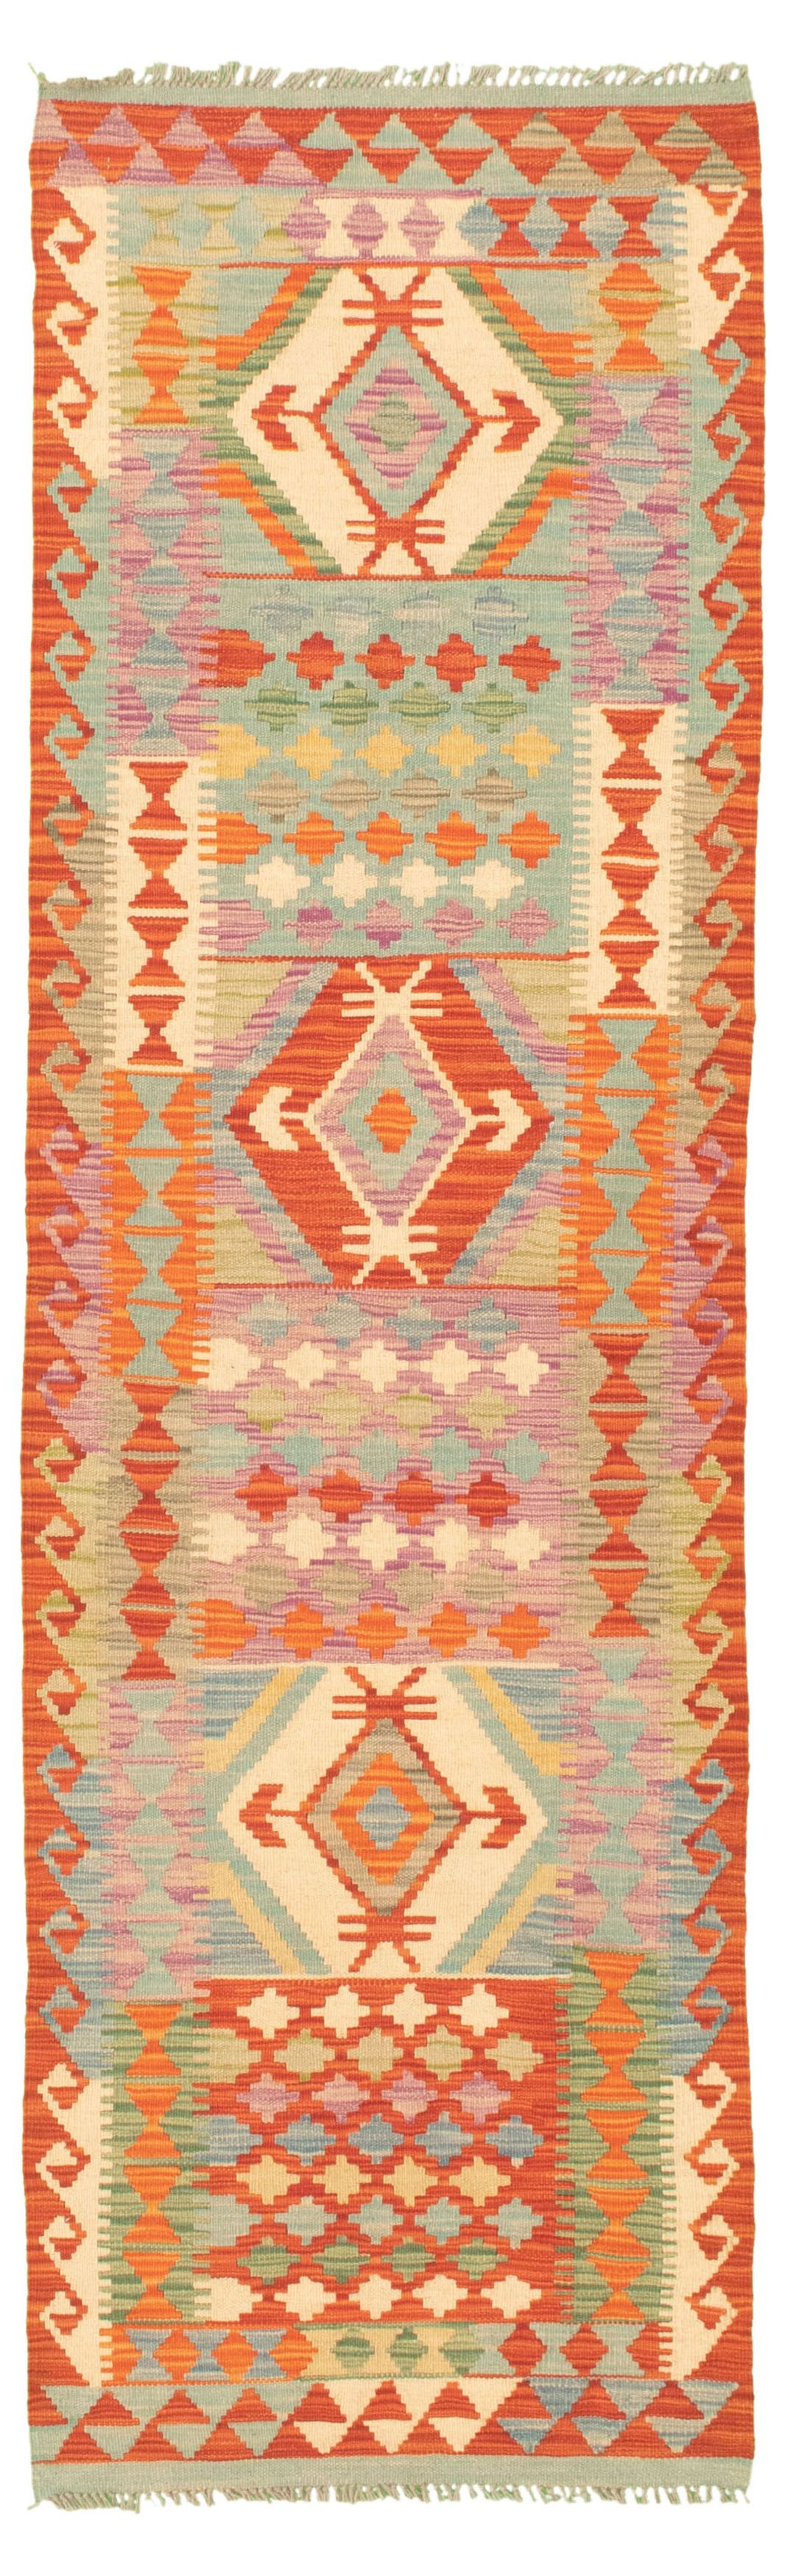 Hand woven Bold and Colorful  Dark Copper Wool Kilim 2'5" x 10'3" Size: 2'5" x 10'3"  